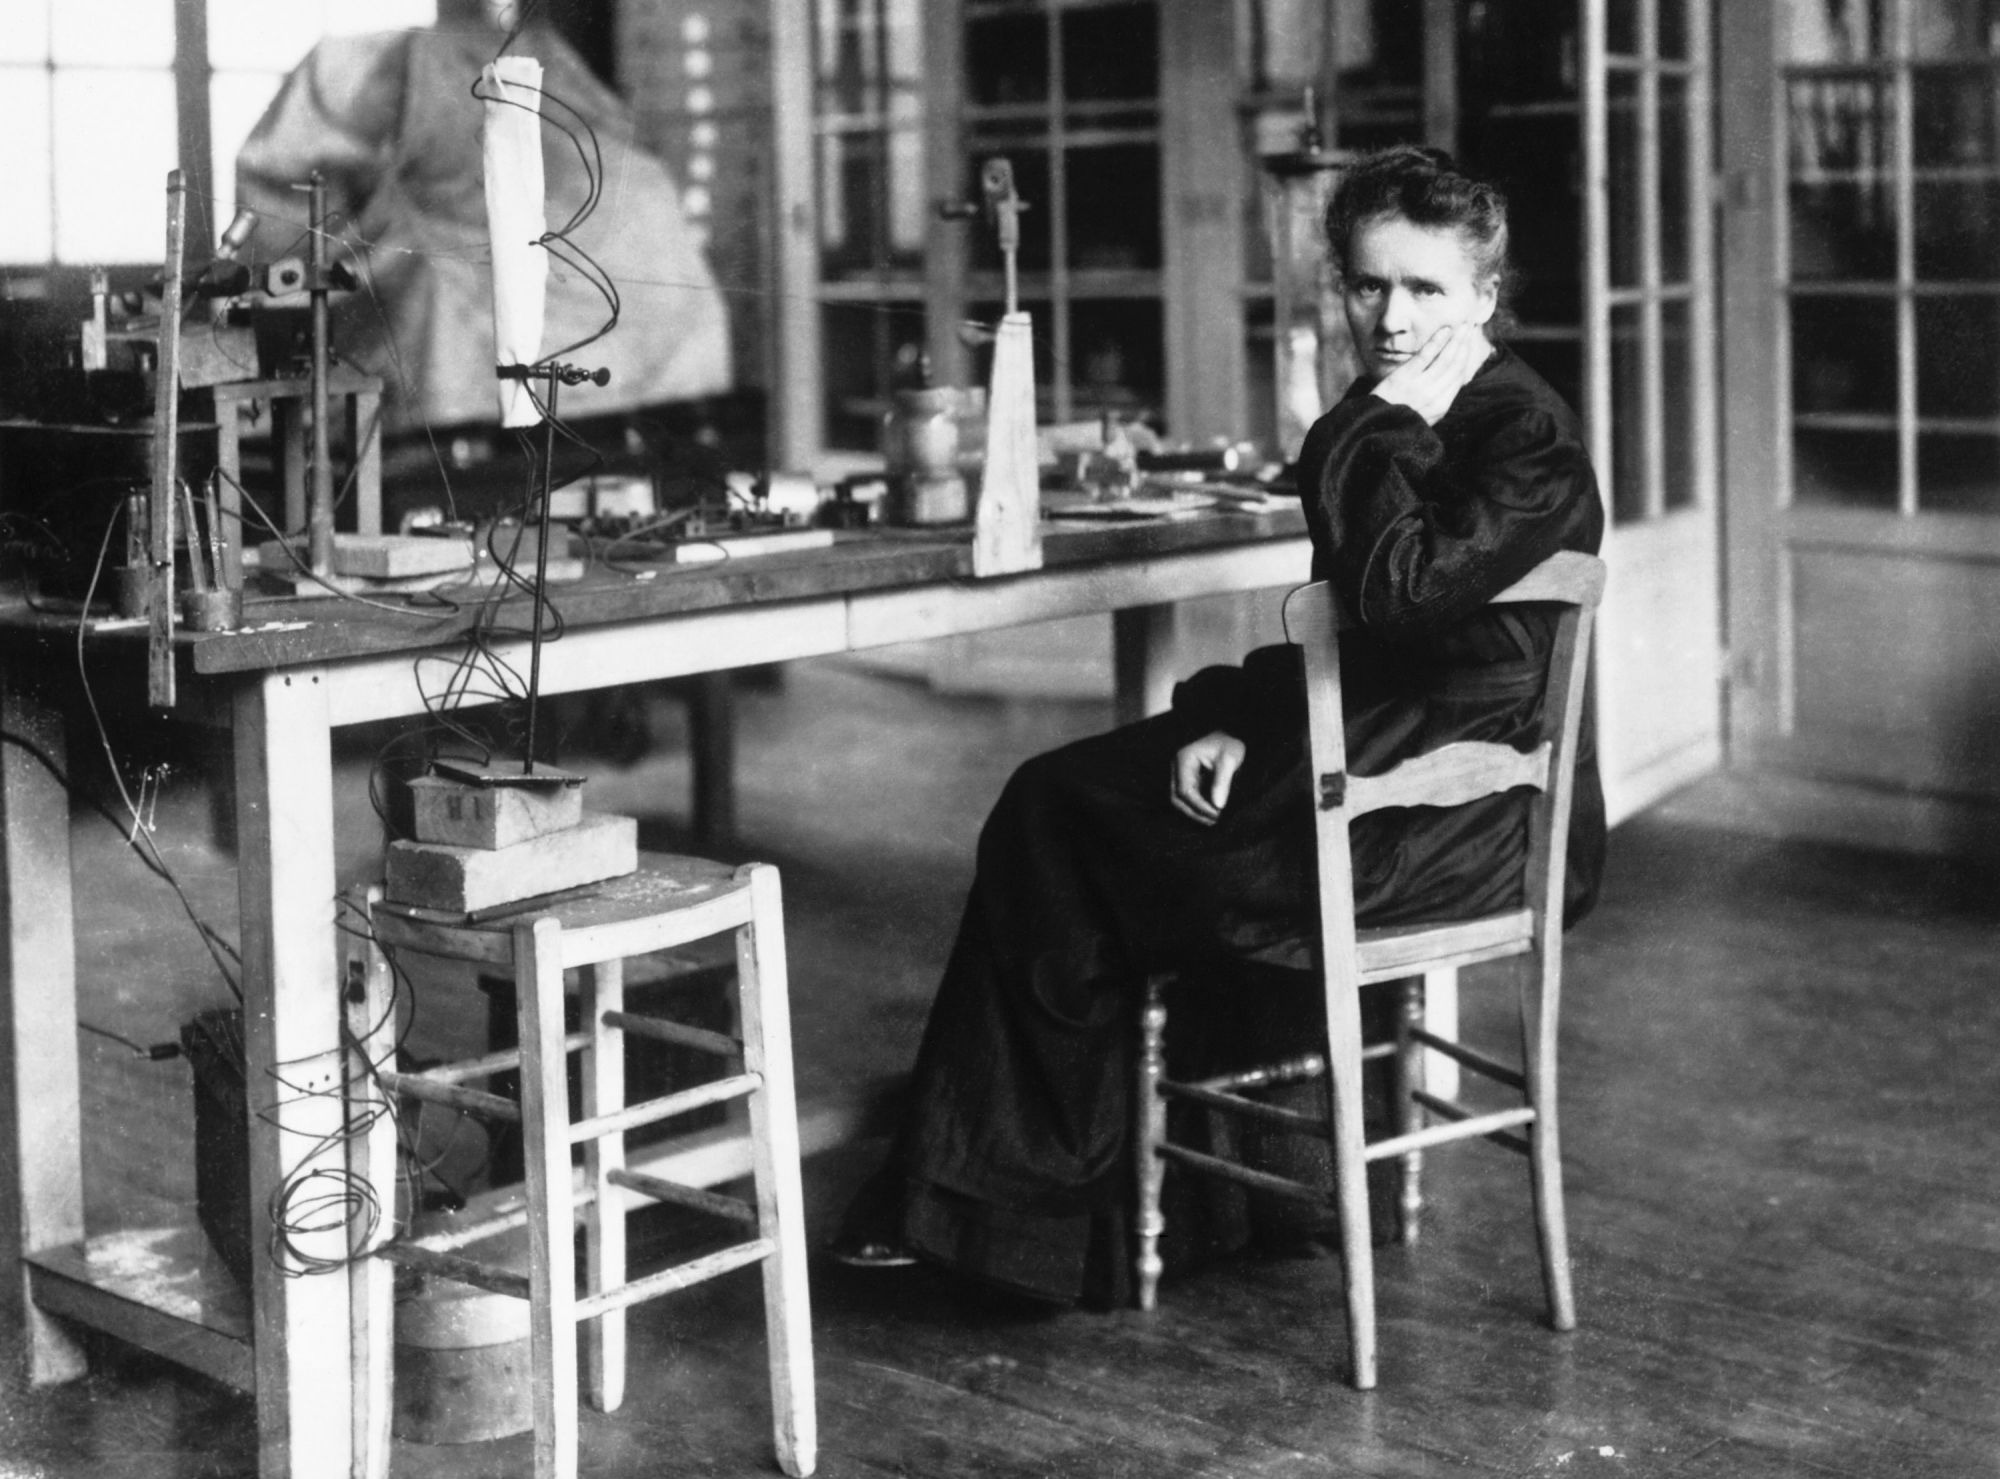 Marie Sklodowka Curie (1867 - 1934) in her laboratory. She shared a Nobel Prize in Physics in 1903 with her husband Pierre for their work in radioactivity. In 1911 she became one of the few people to be awarded a second Nobel Prize, this time in chemisty for her discovery of poloium and radium. Her daugther and son-in-law also shared a Nobel Prize for Chemistry in 1935 for work in radioactive materials. He went on to become the first chairman of the French atomic energy commission. France. (Photo by © Hulton-Deutsch Collection/CORBIS/Corbis via Getty Images)